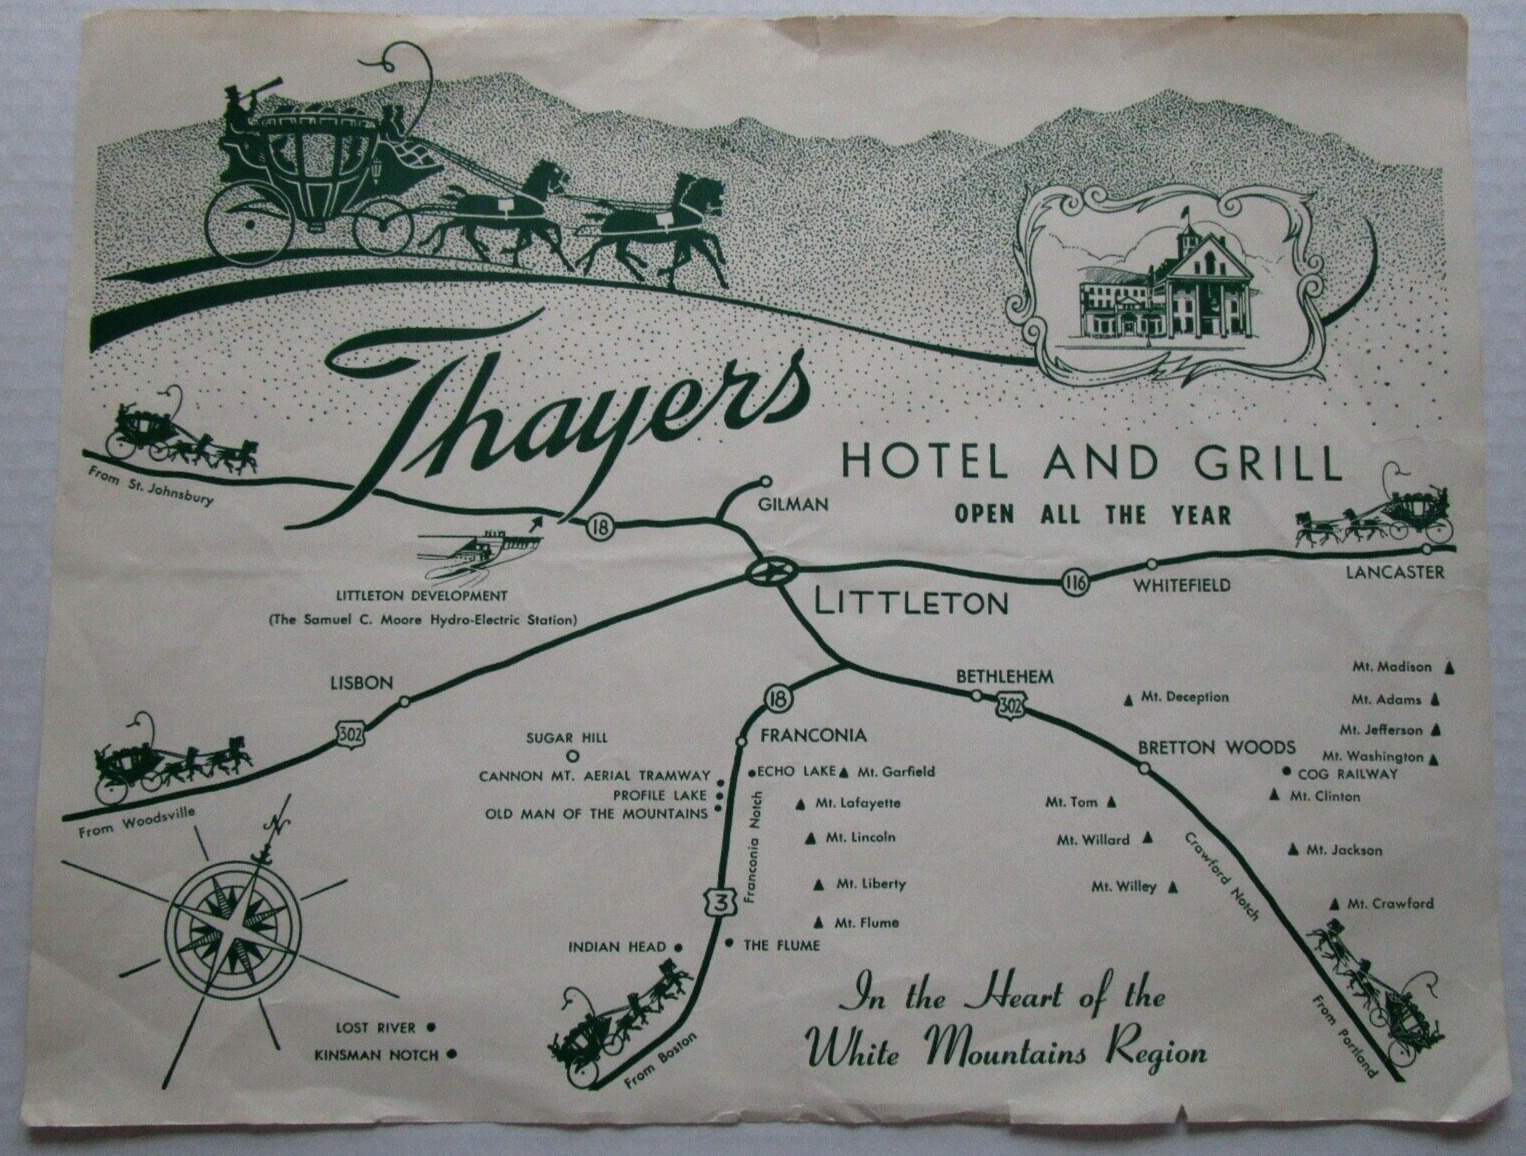 THAYERS HOTEL & GRILL LITTLETON, NH VINTAGE PLACE MAT - A19